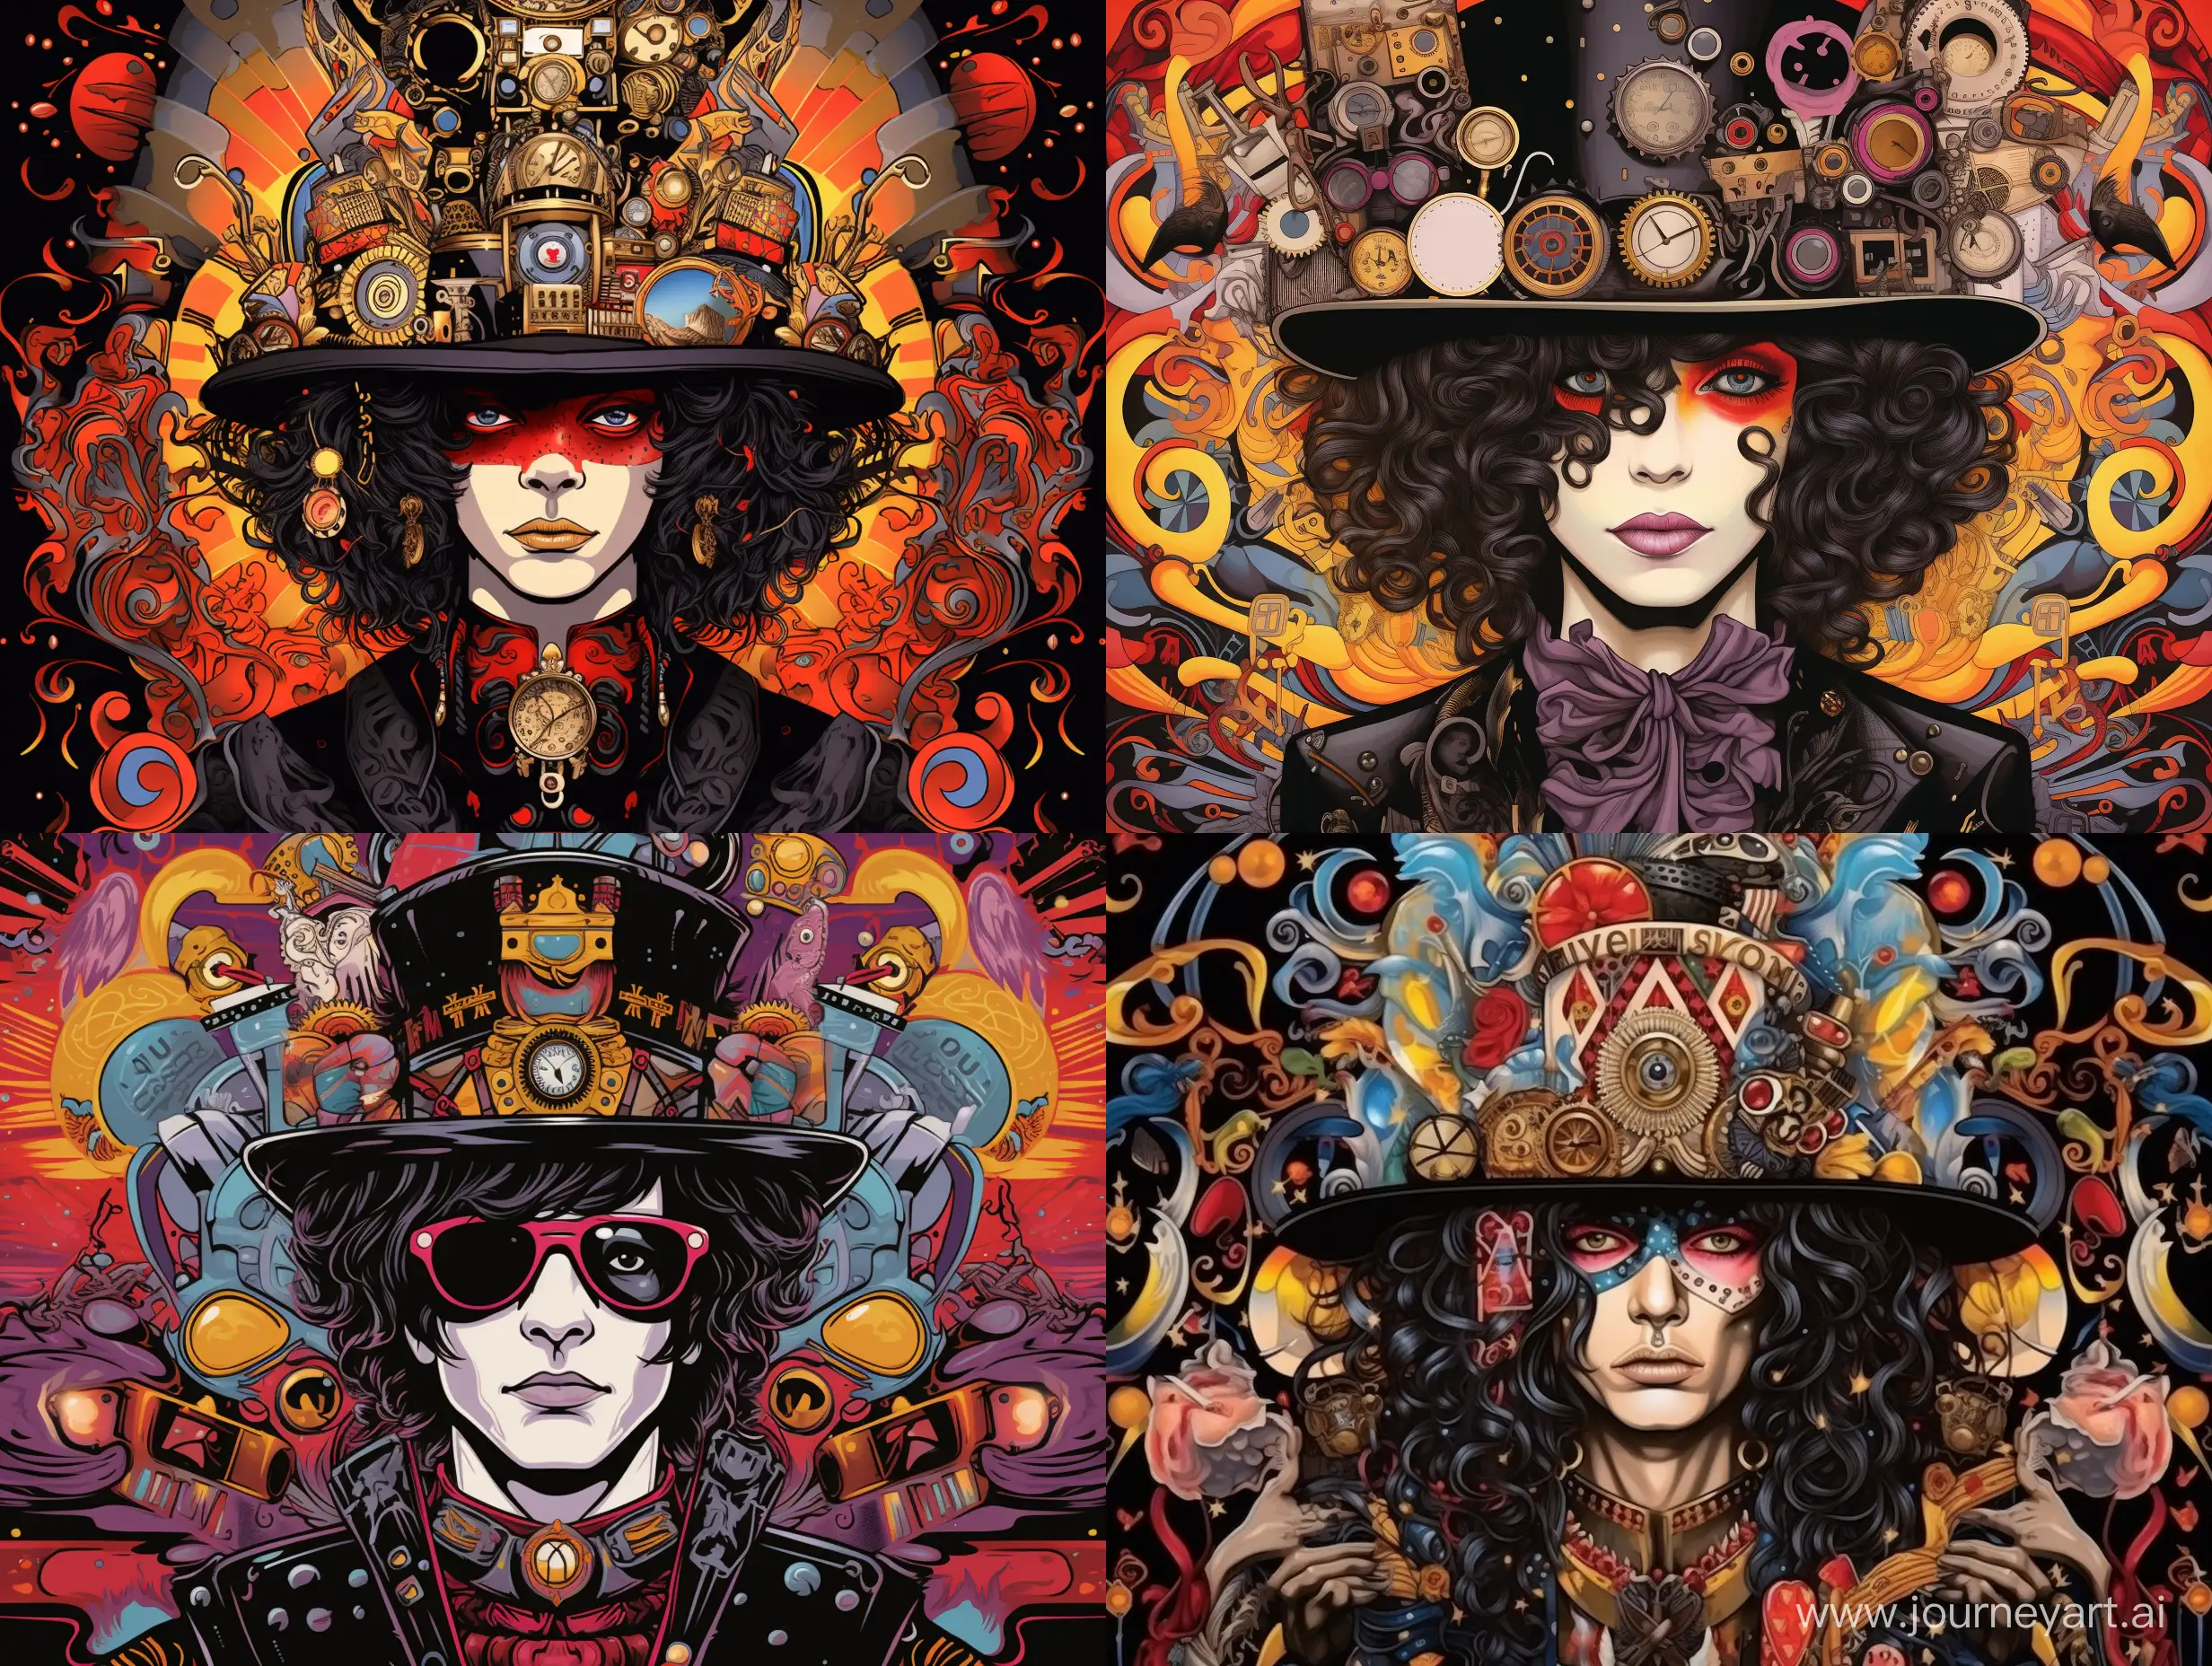 Waist portrait of Michael Jackson, middle-aged, with a crown on his head, surrounded by musical symbols, lots of details, complex colors, caricature, pop art style